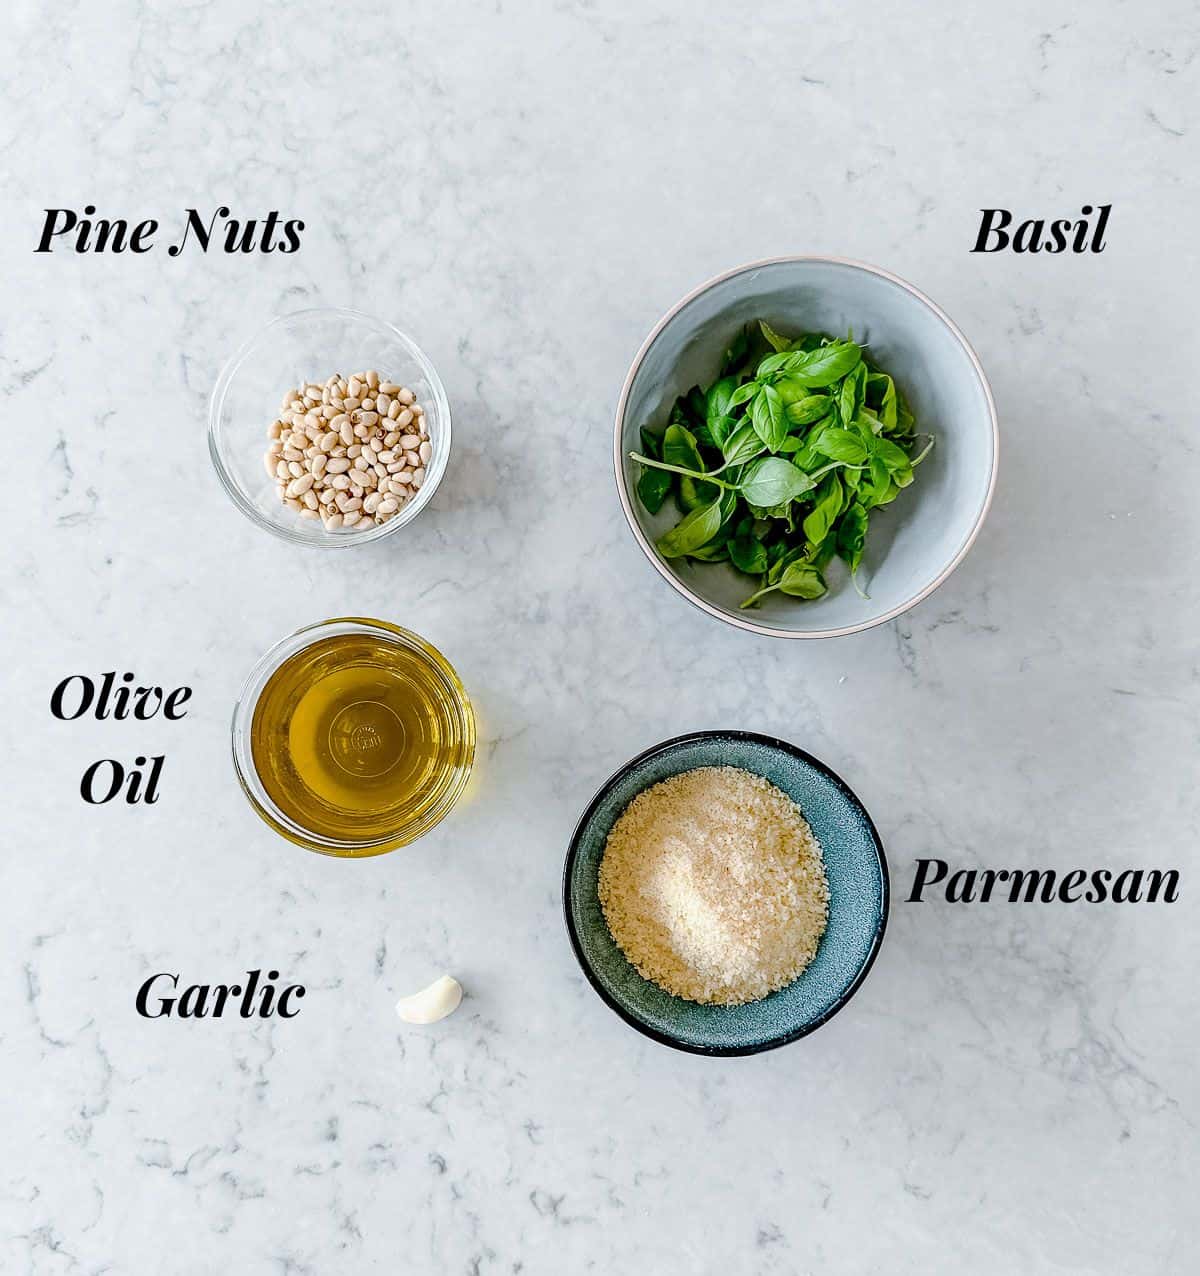 A collection of ingredients used to make Basil Pesto.